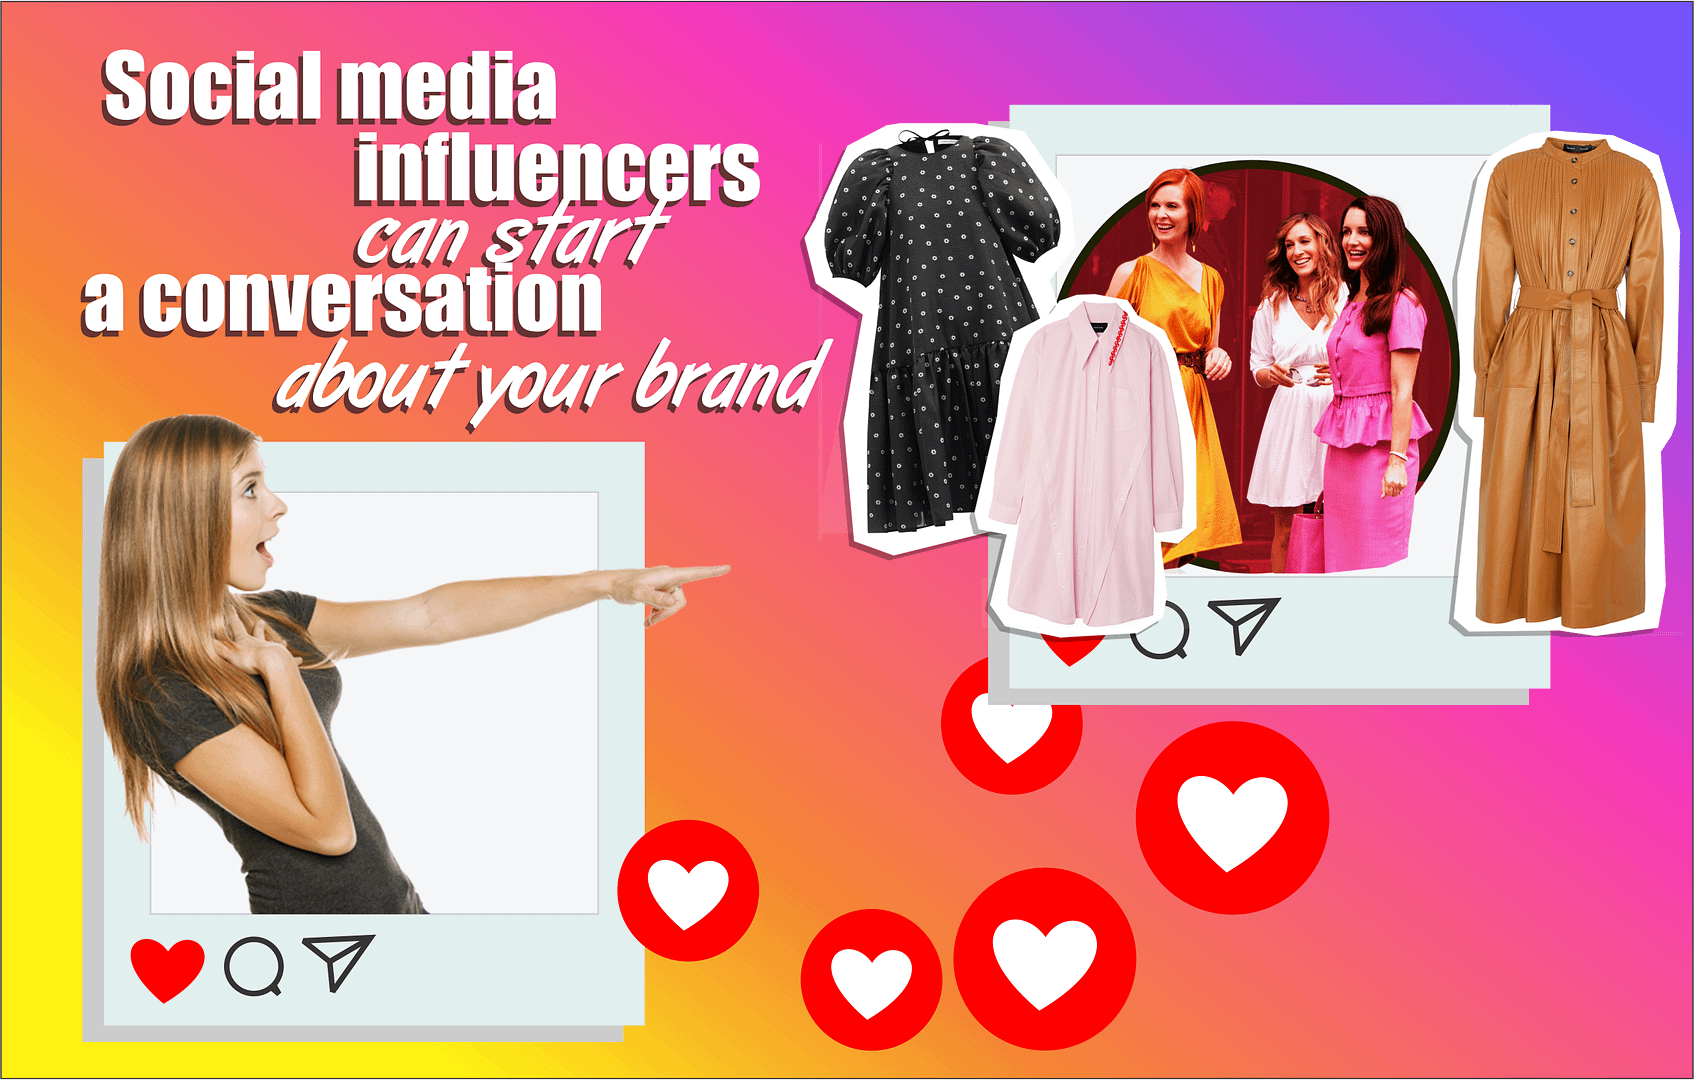 Social media influencers can start a conversation about your brand